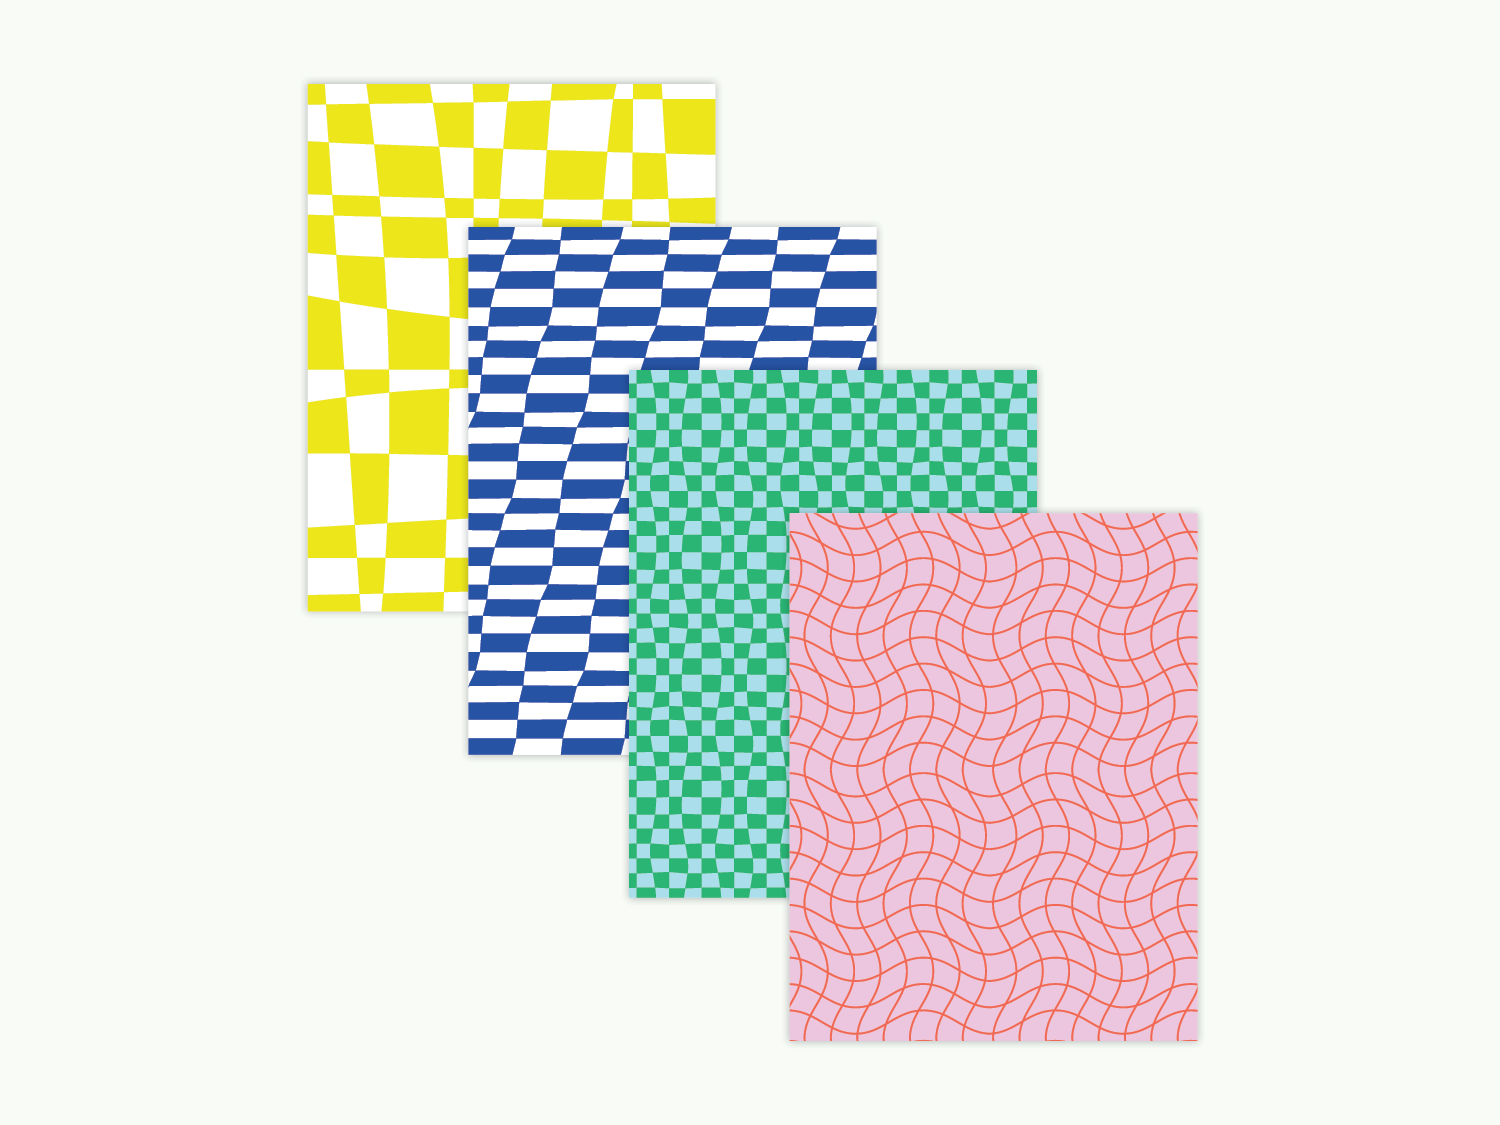 Set of 8 checker and grid pattern assorted blank greeting cards that bend space and time. Made in USA by @mydarlin_bk